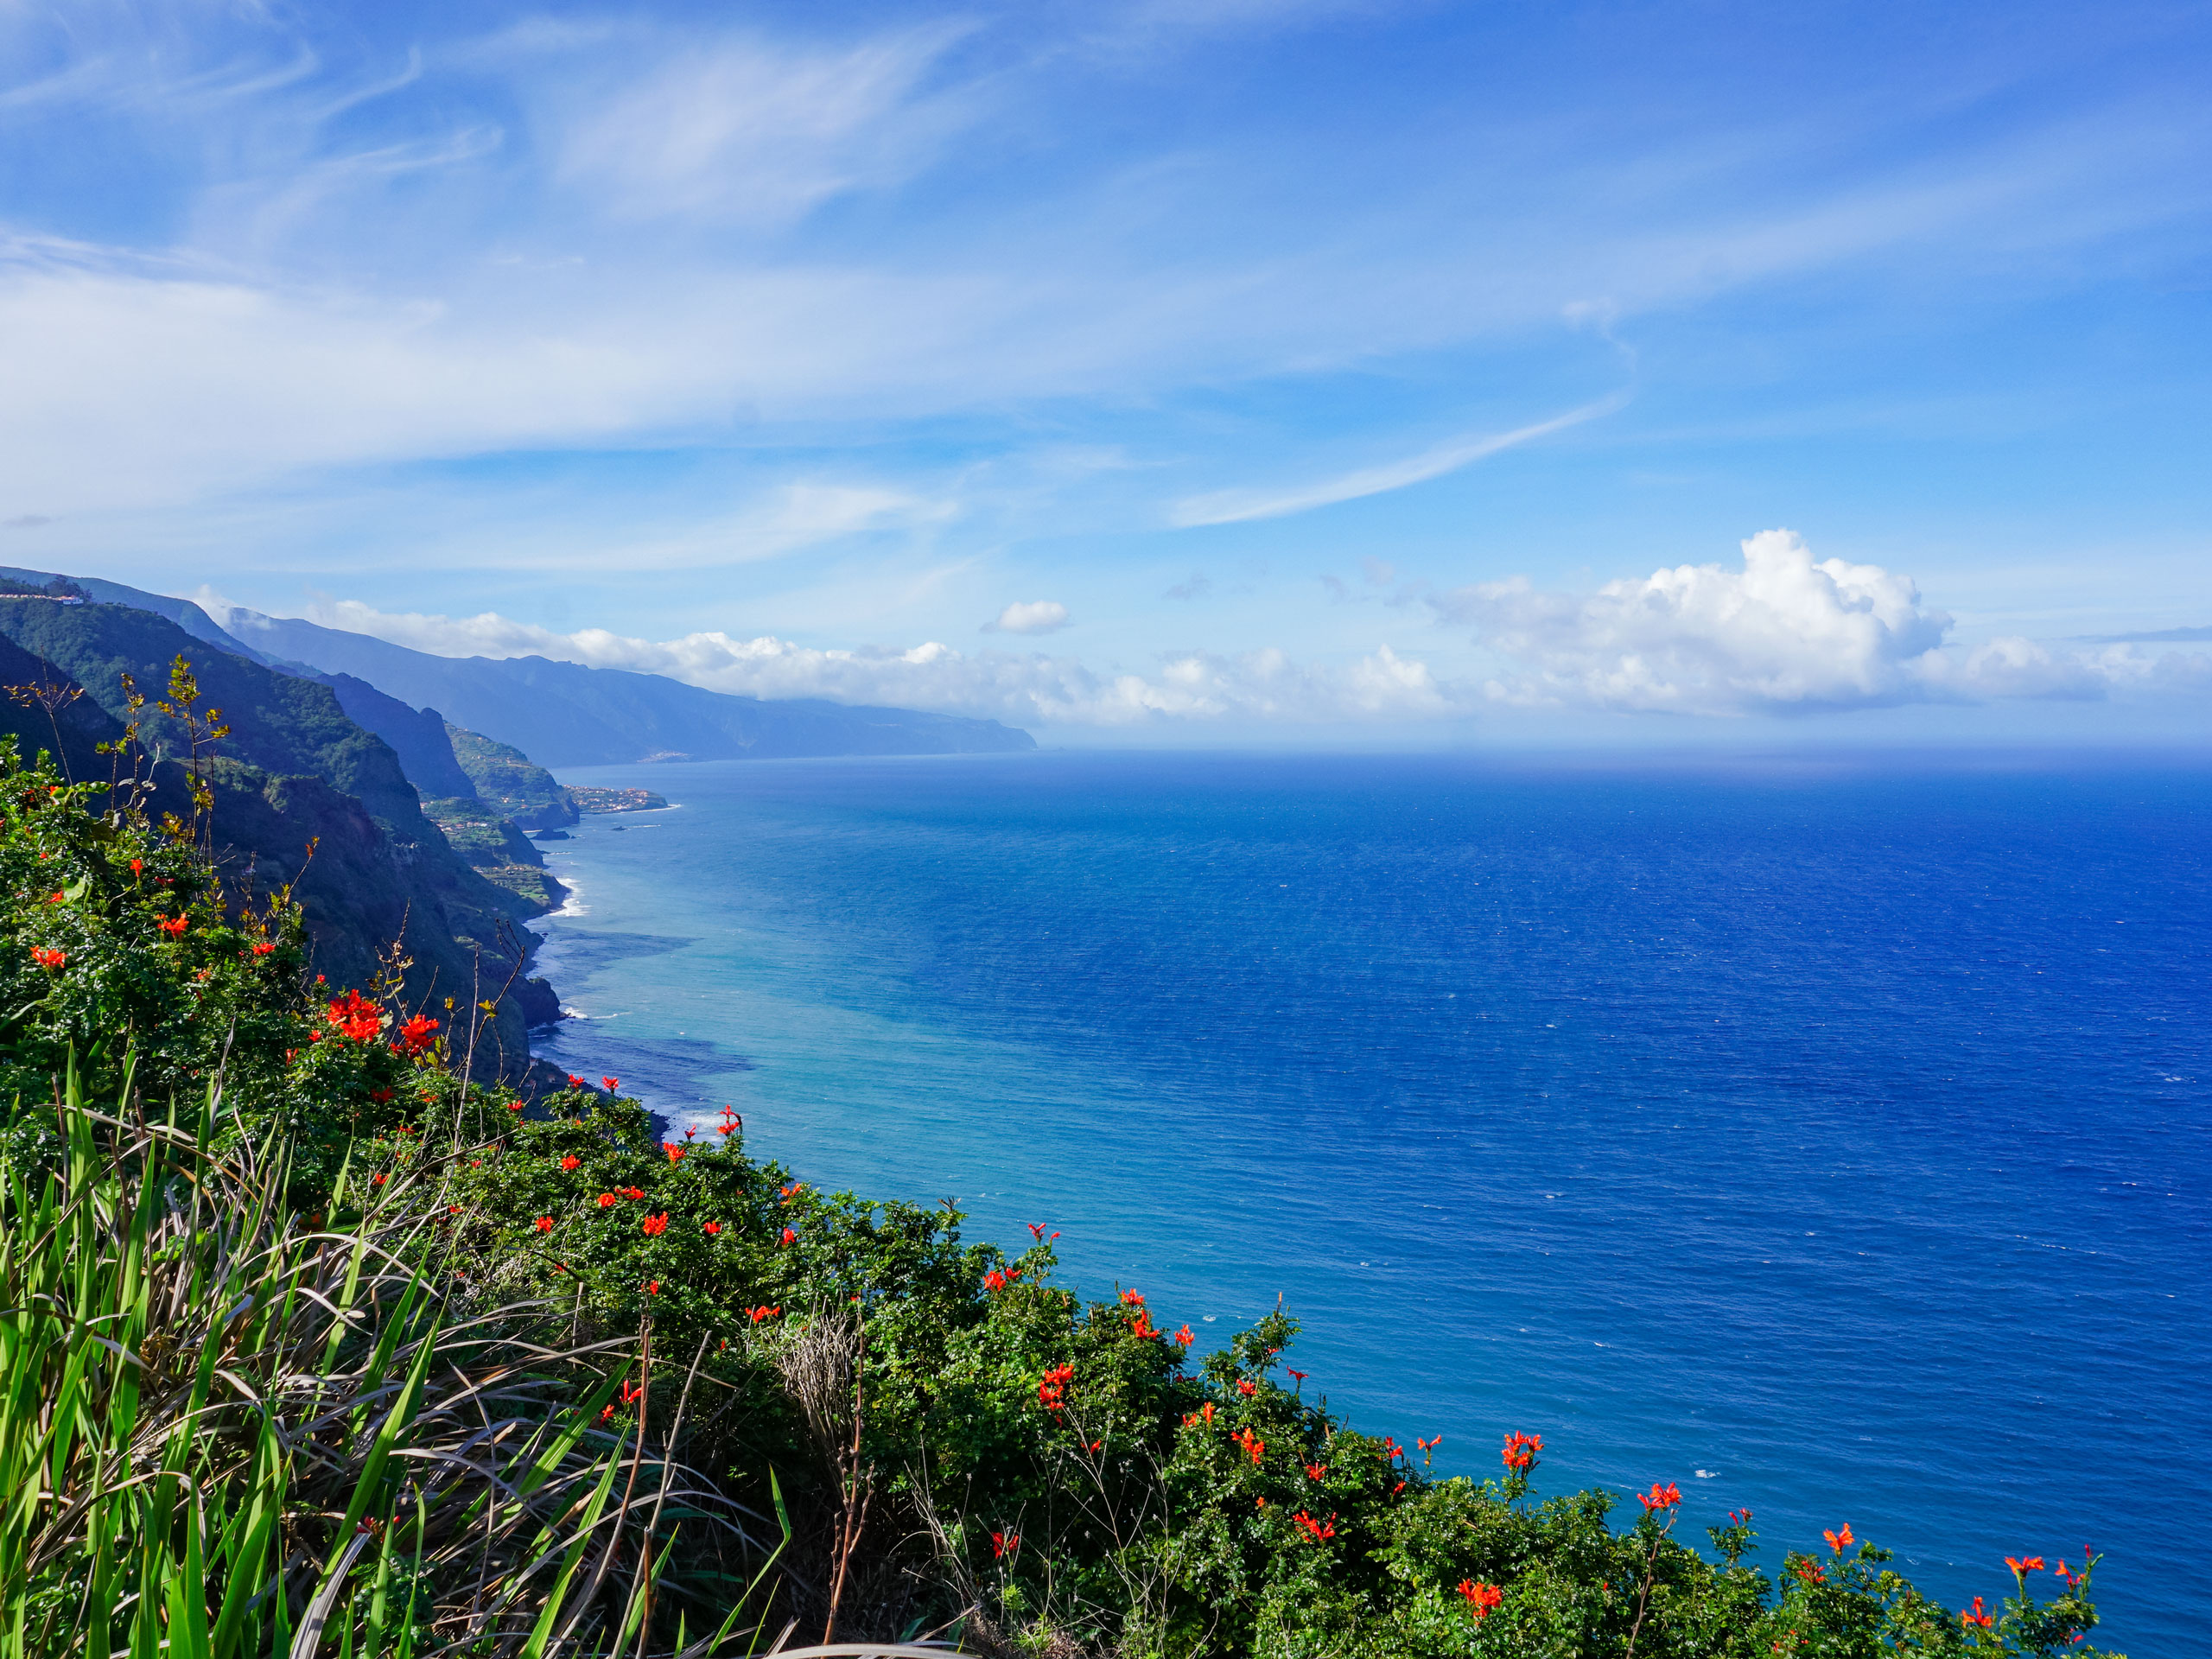 Hiking among wildflowers above the ocean view of cliffs in the distance Caminho real Maderira Spain